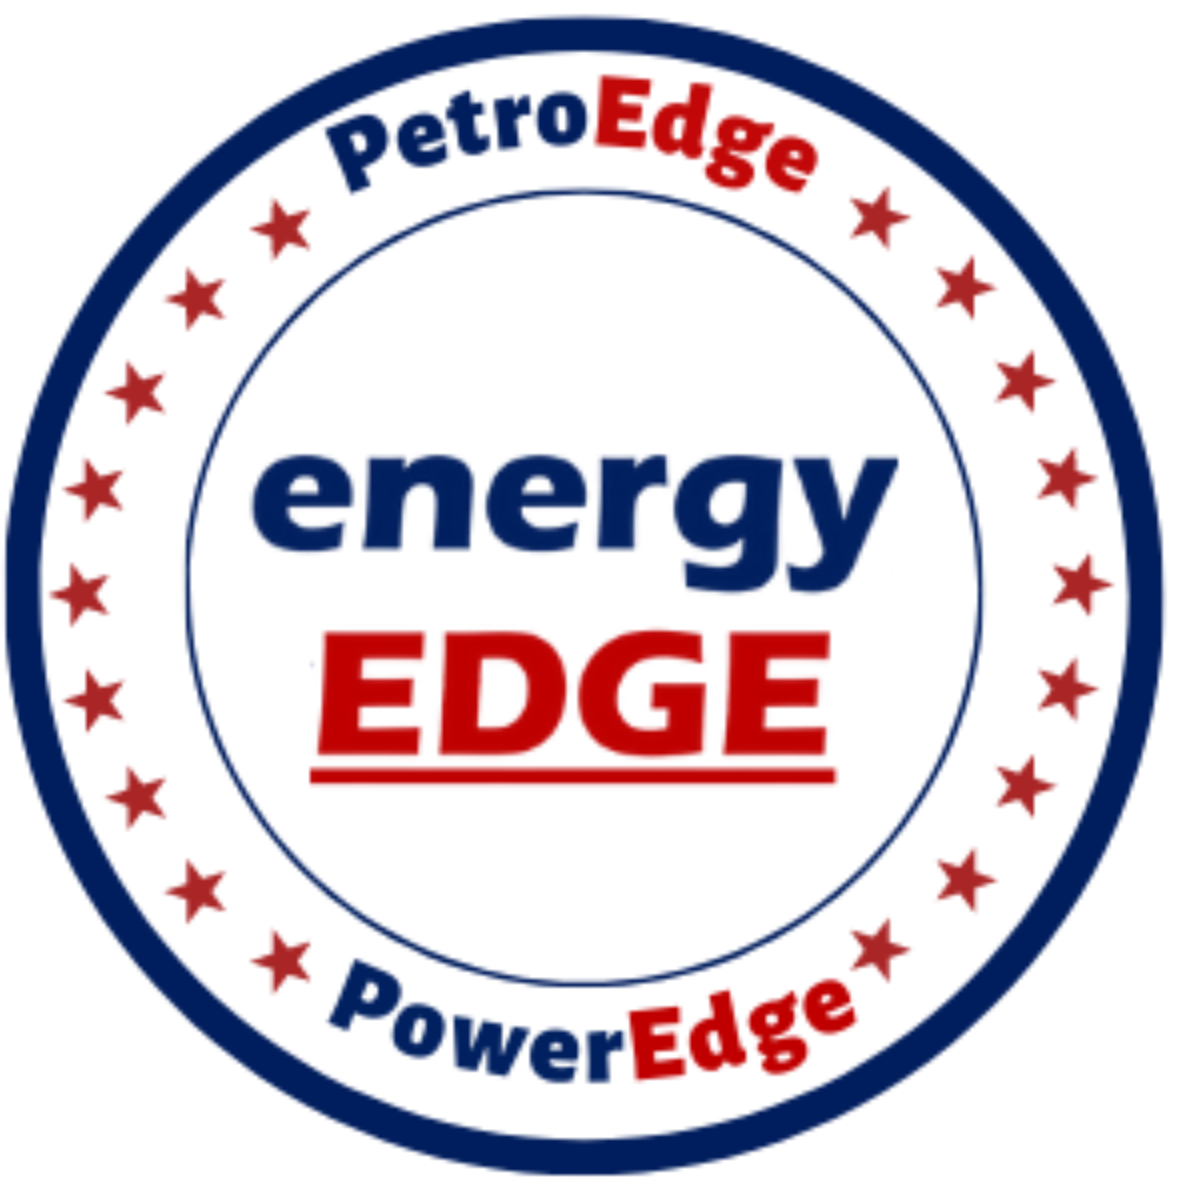 EnergyEdge - Training for a Sustainable Energy Future